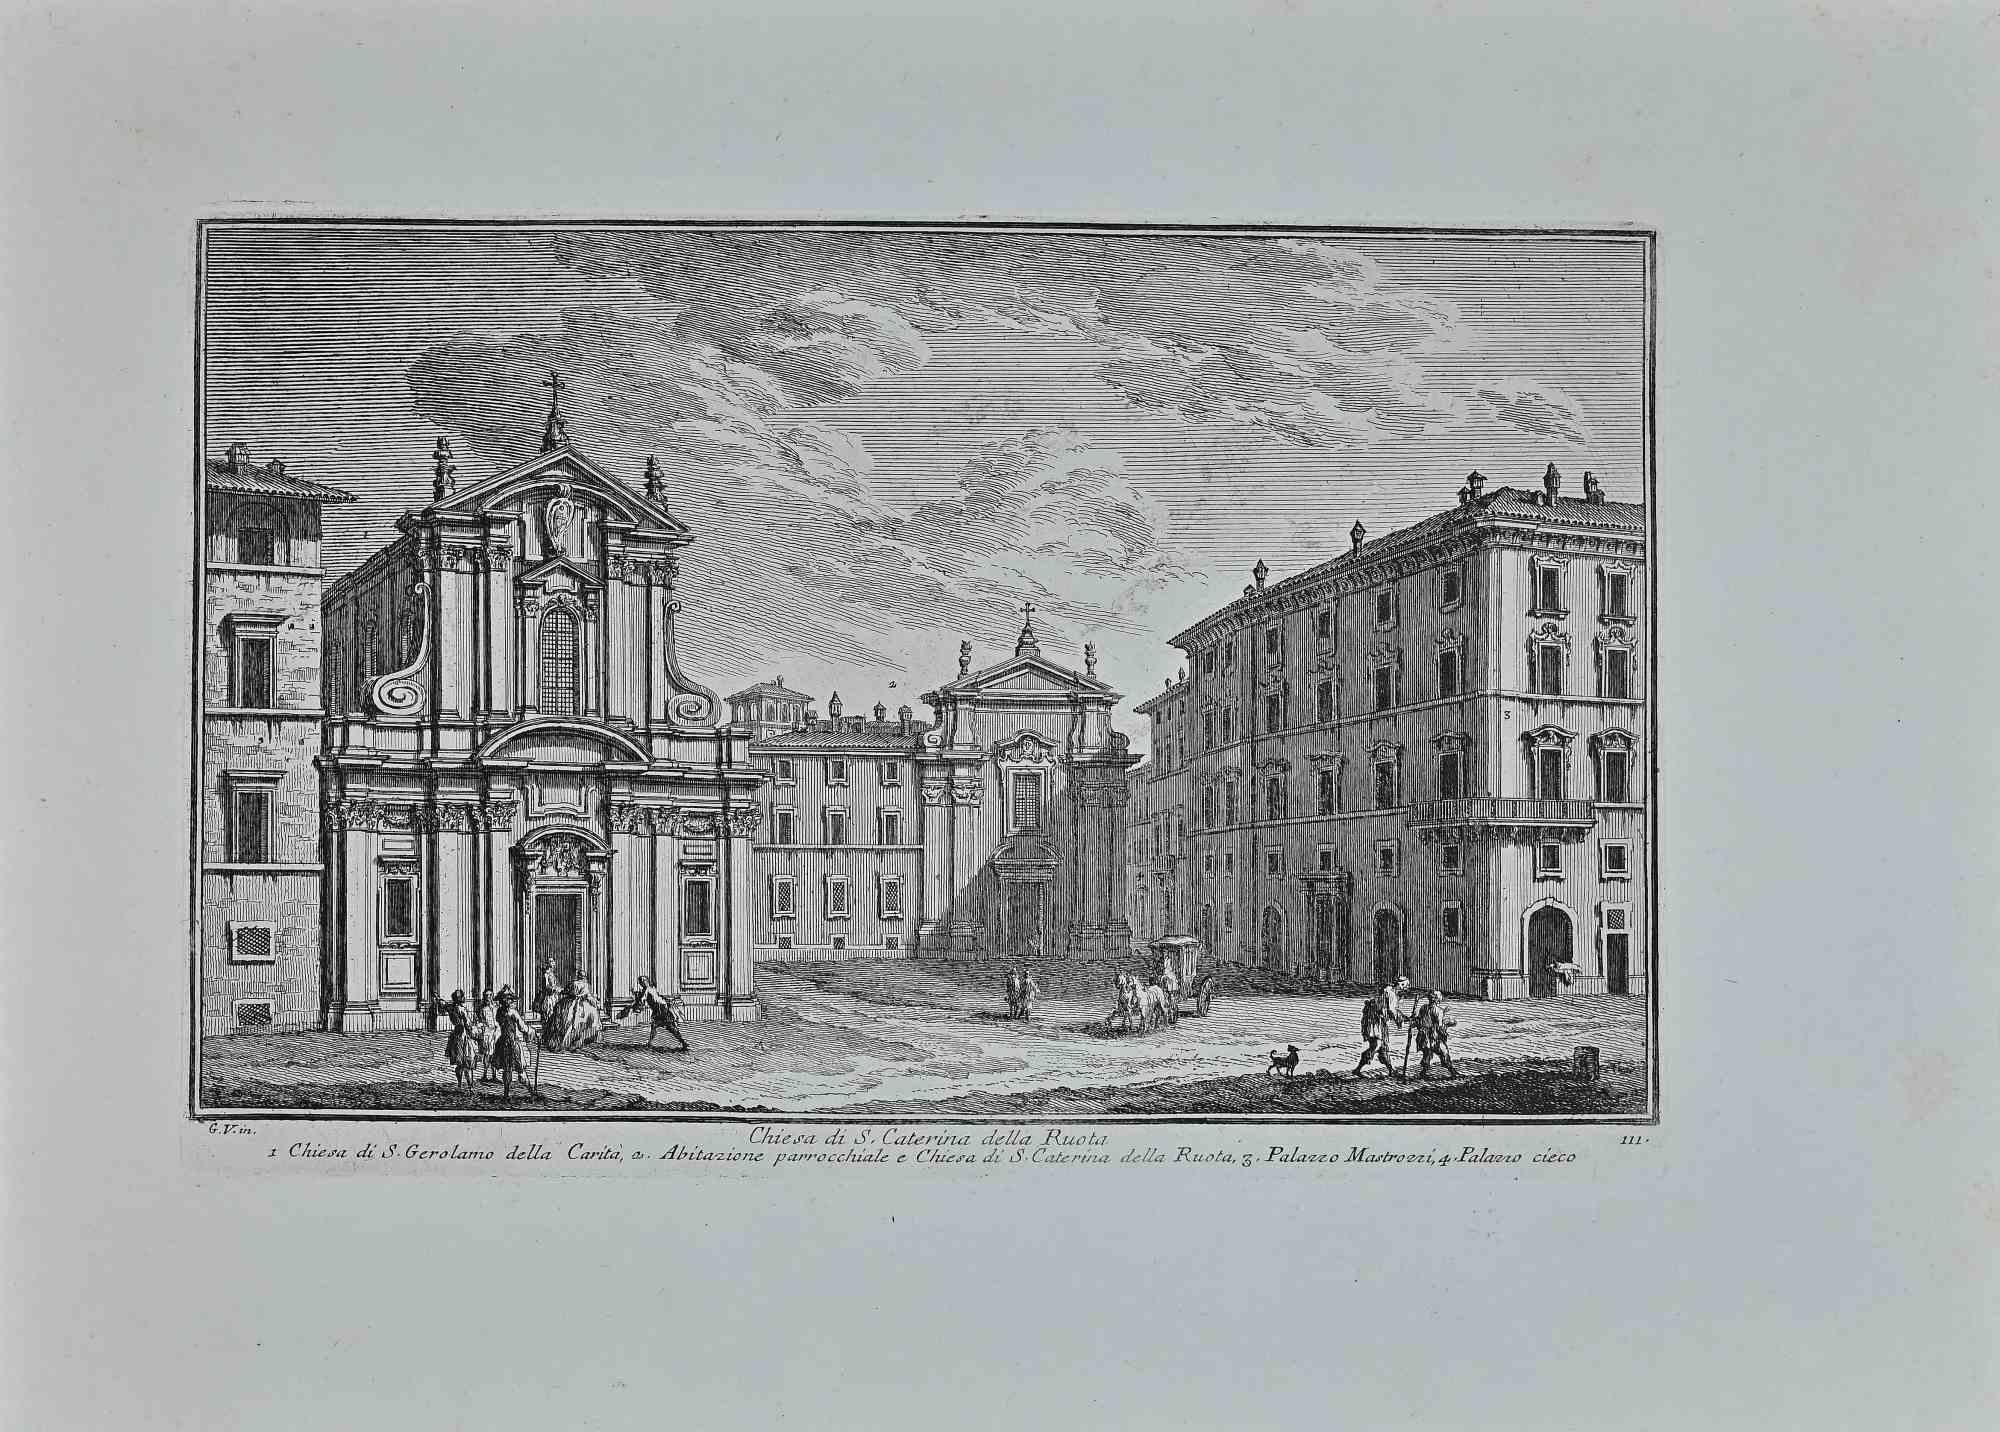 S. Caterina della Ruota Church is an original etching of the Late 18th century realized by Giuseppe Vasi.

Signed and titled on plate lower margin. 

Good conditions.

Giuseppe Vasi  (Corleone,1710 - Rome, 1782) was an engraver, architect, and